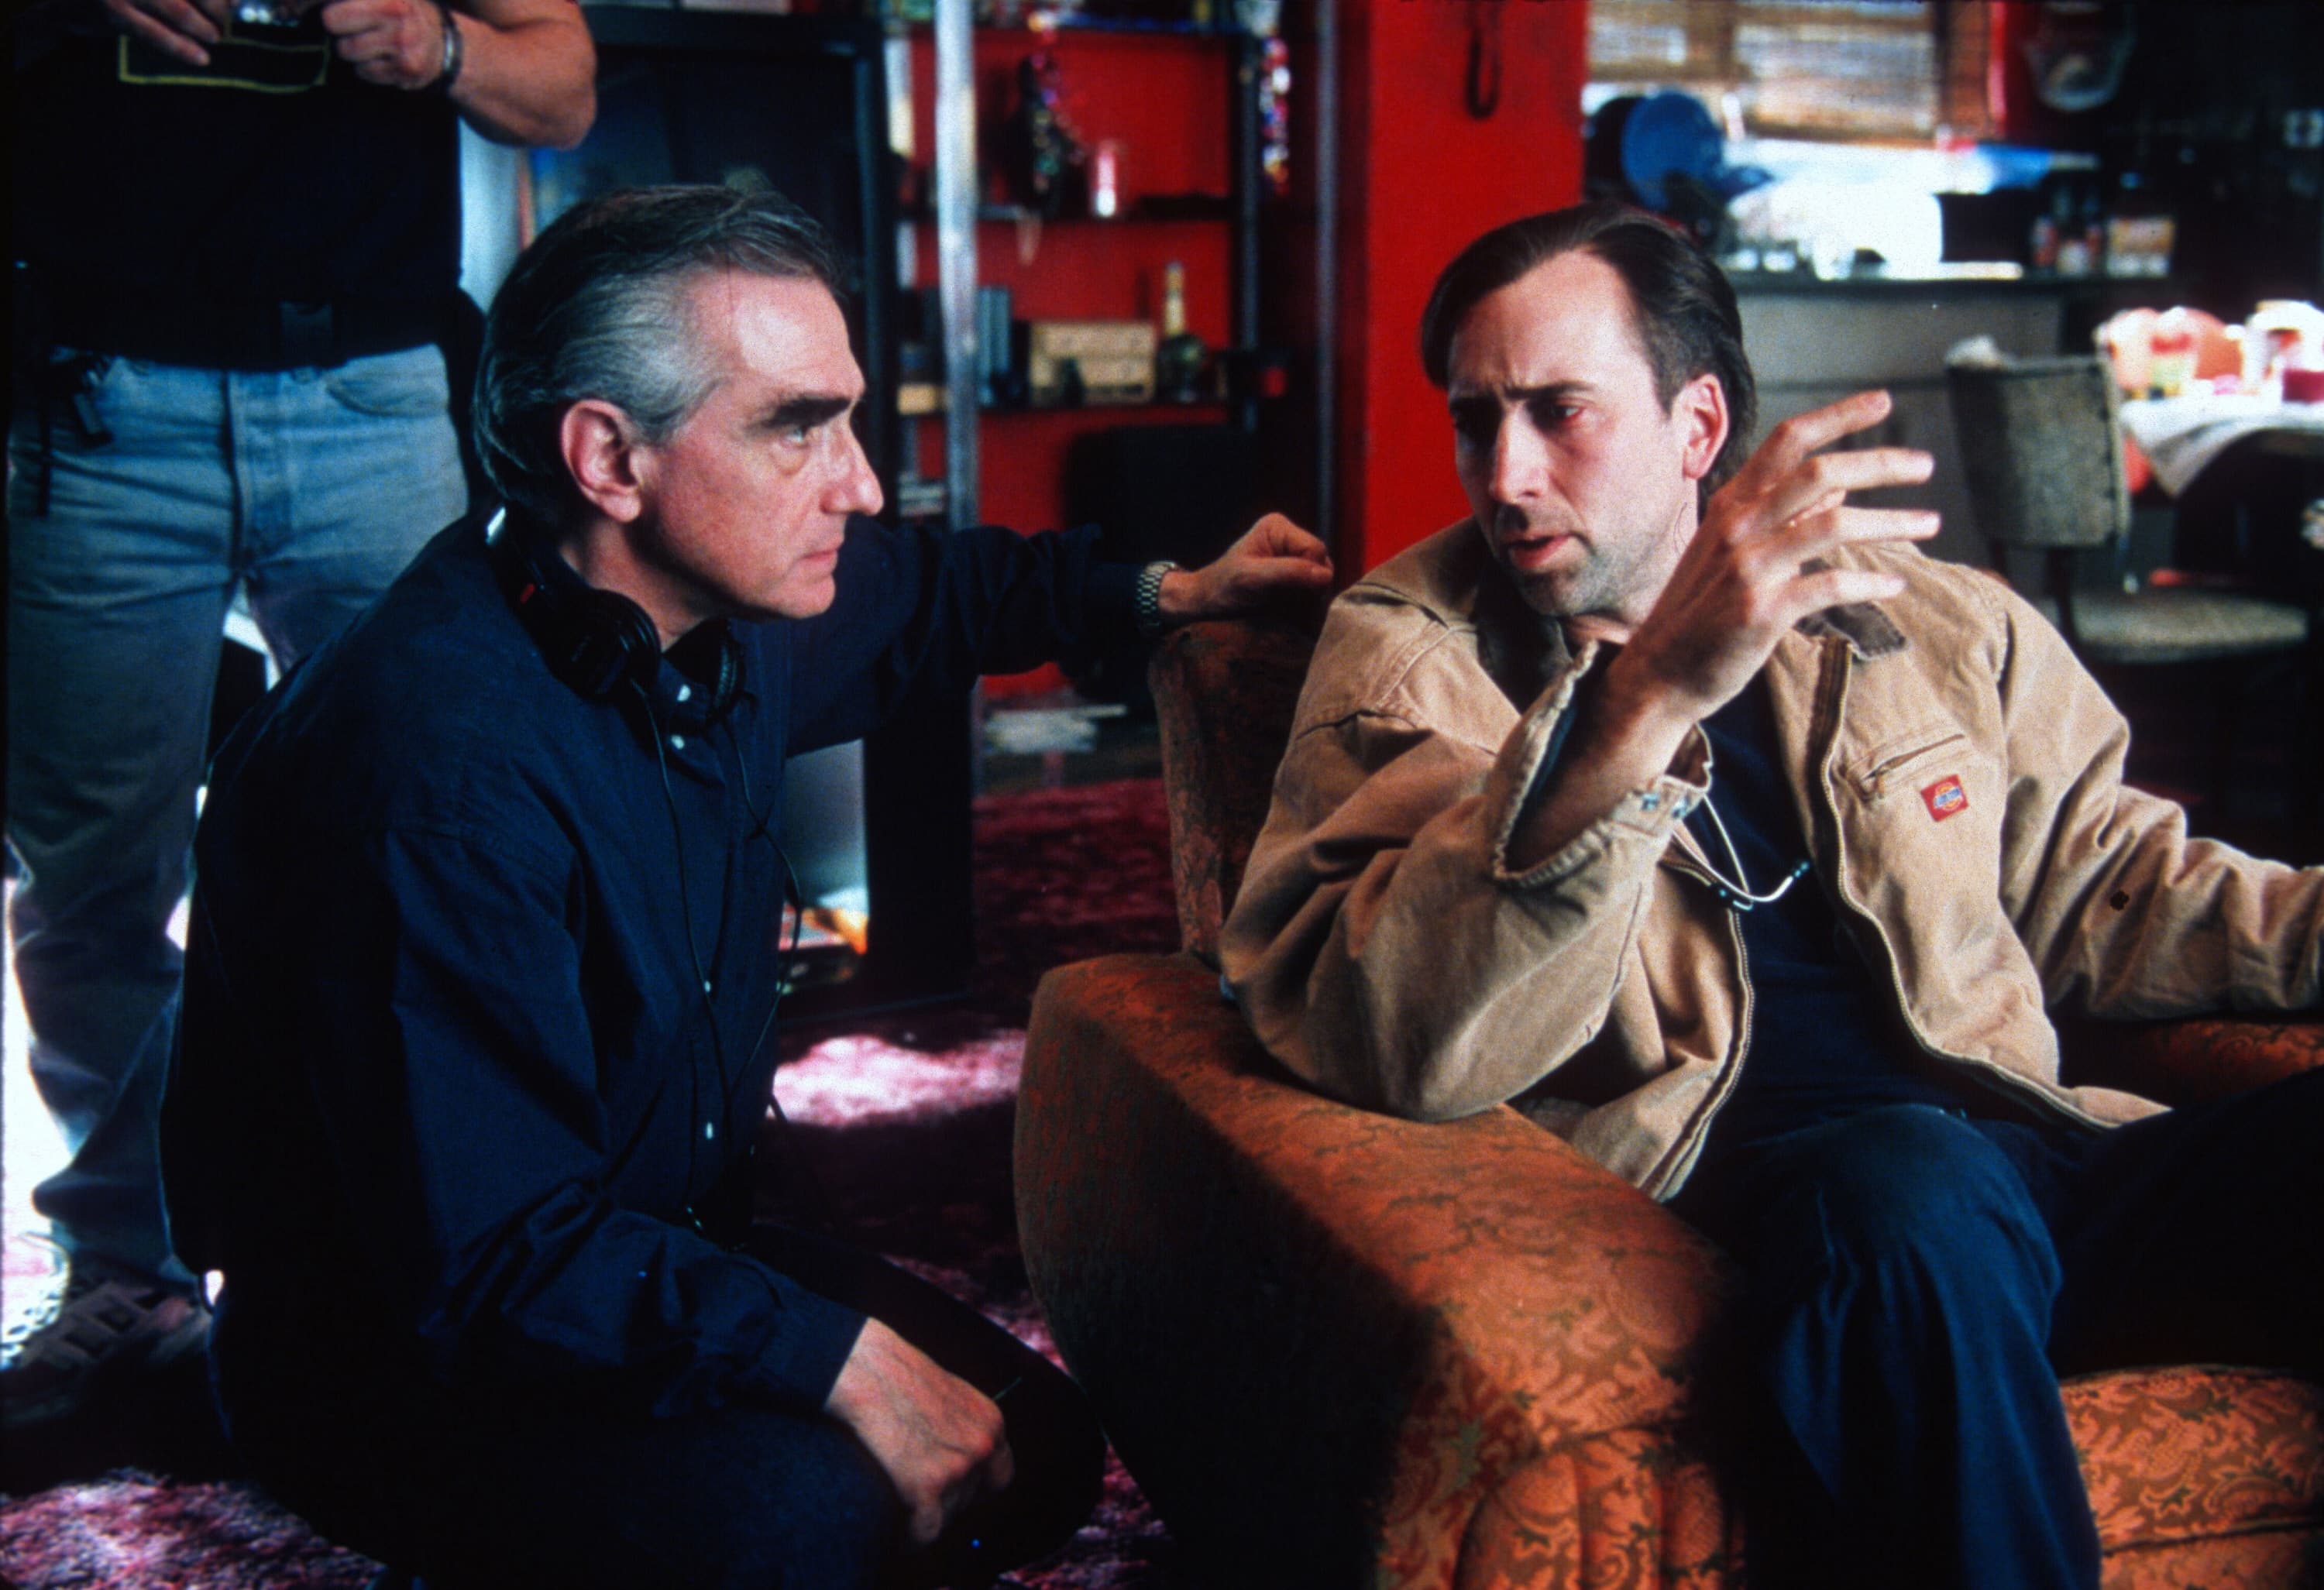 Martin Scorsese (left) with Nicolas Cage on the set of “Bringing Out the Dead” (1999). (Courtesy Paramount Pictures/Photofest)